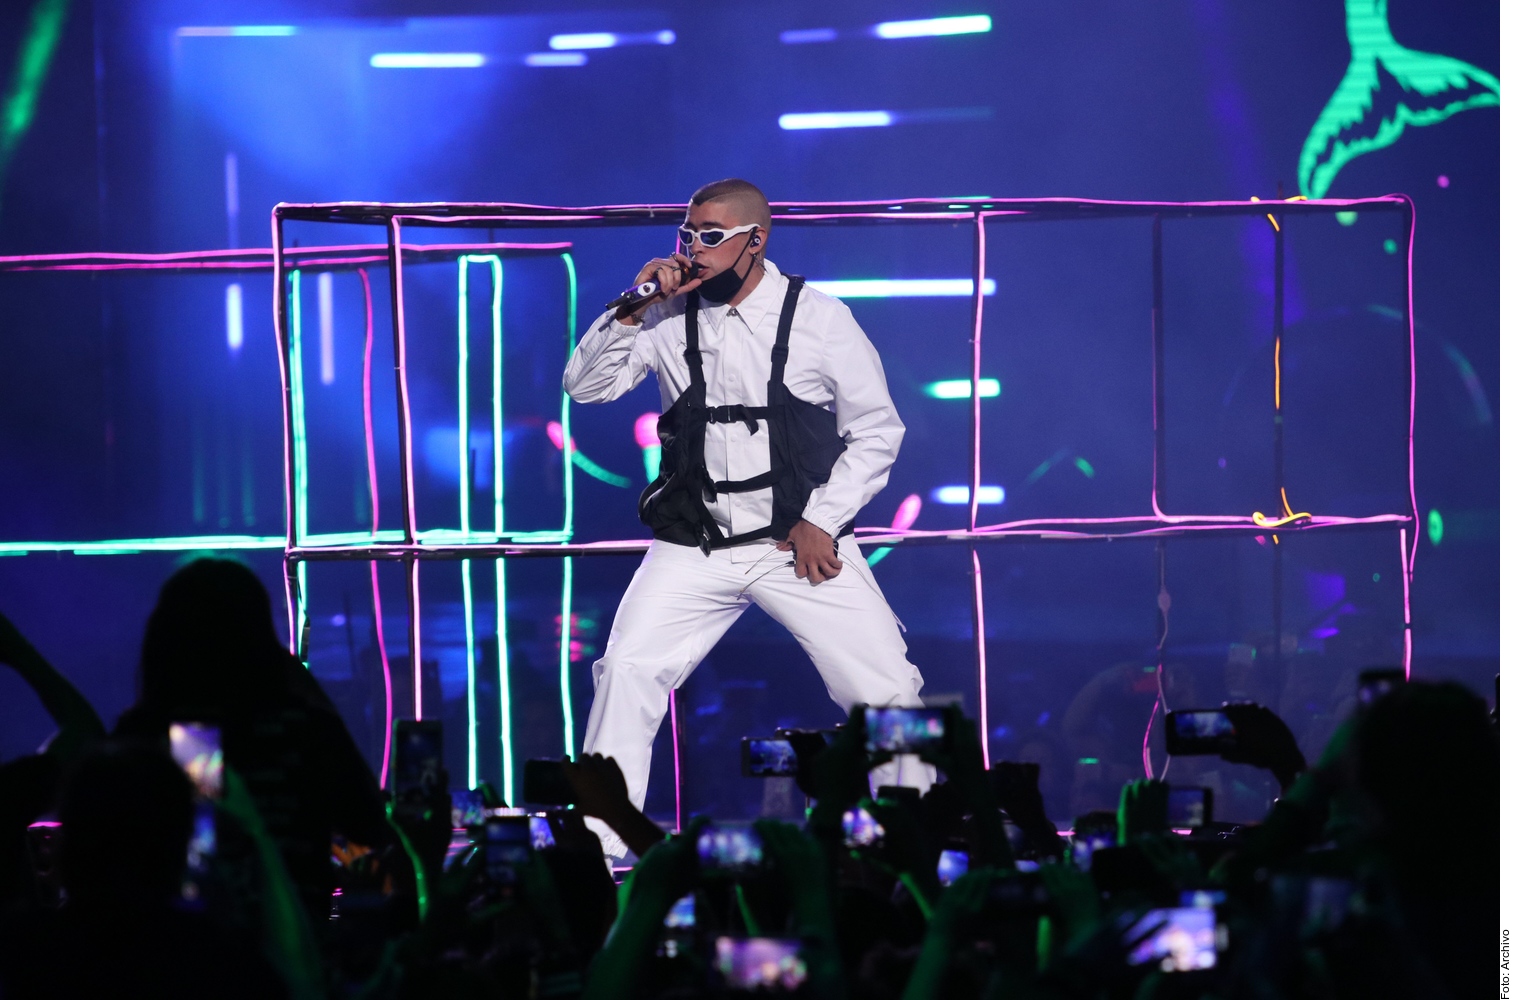 Bad Bunny's “P FKN R” concert cost $10 million to produce